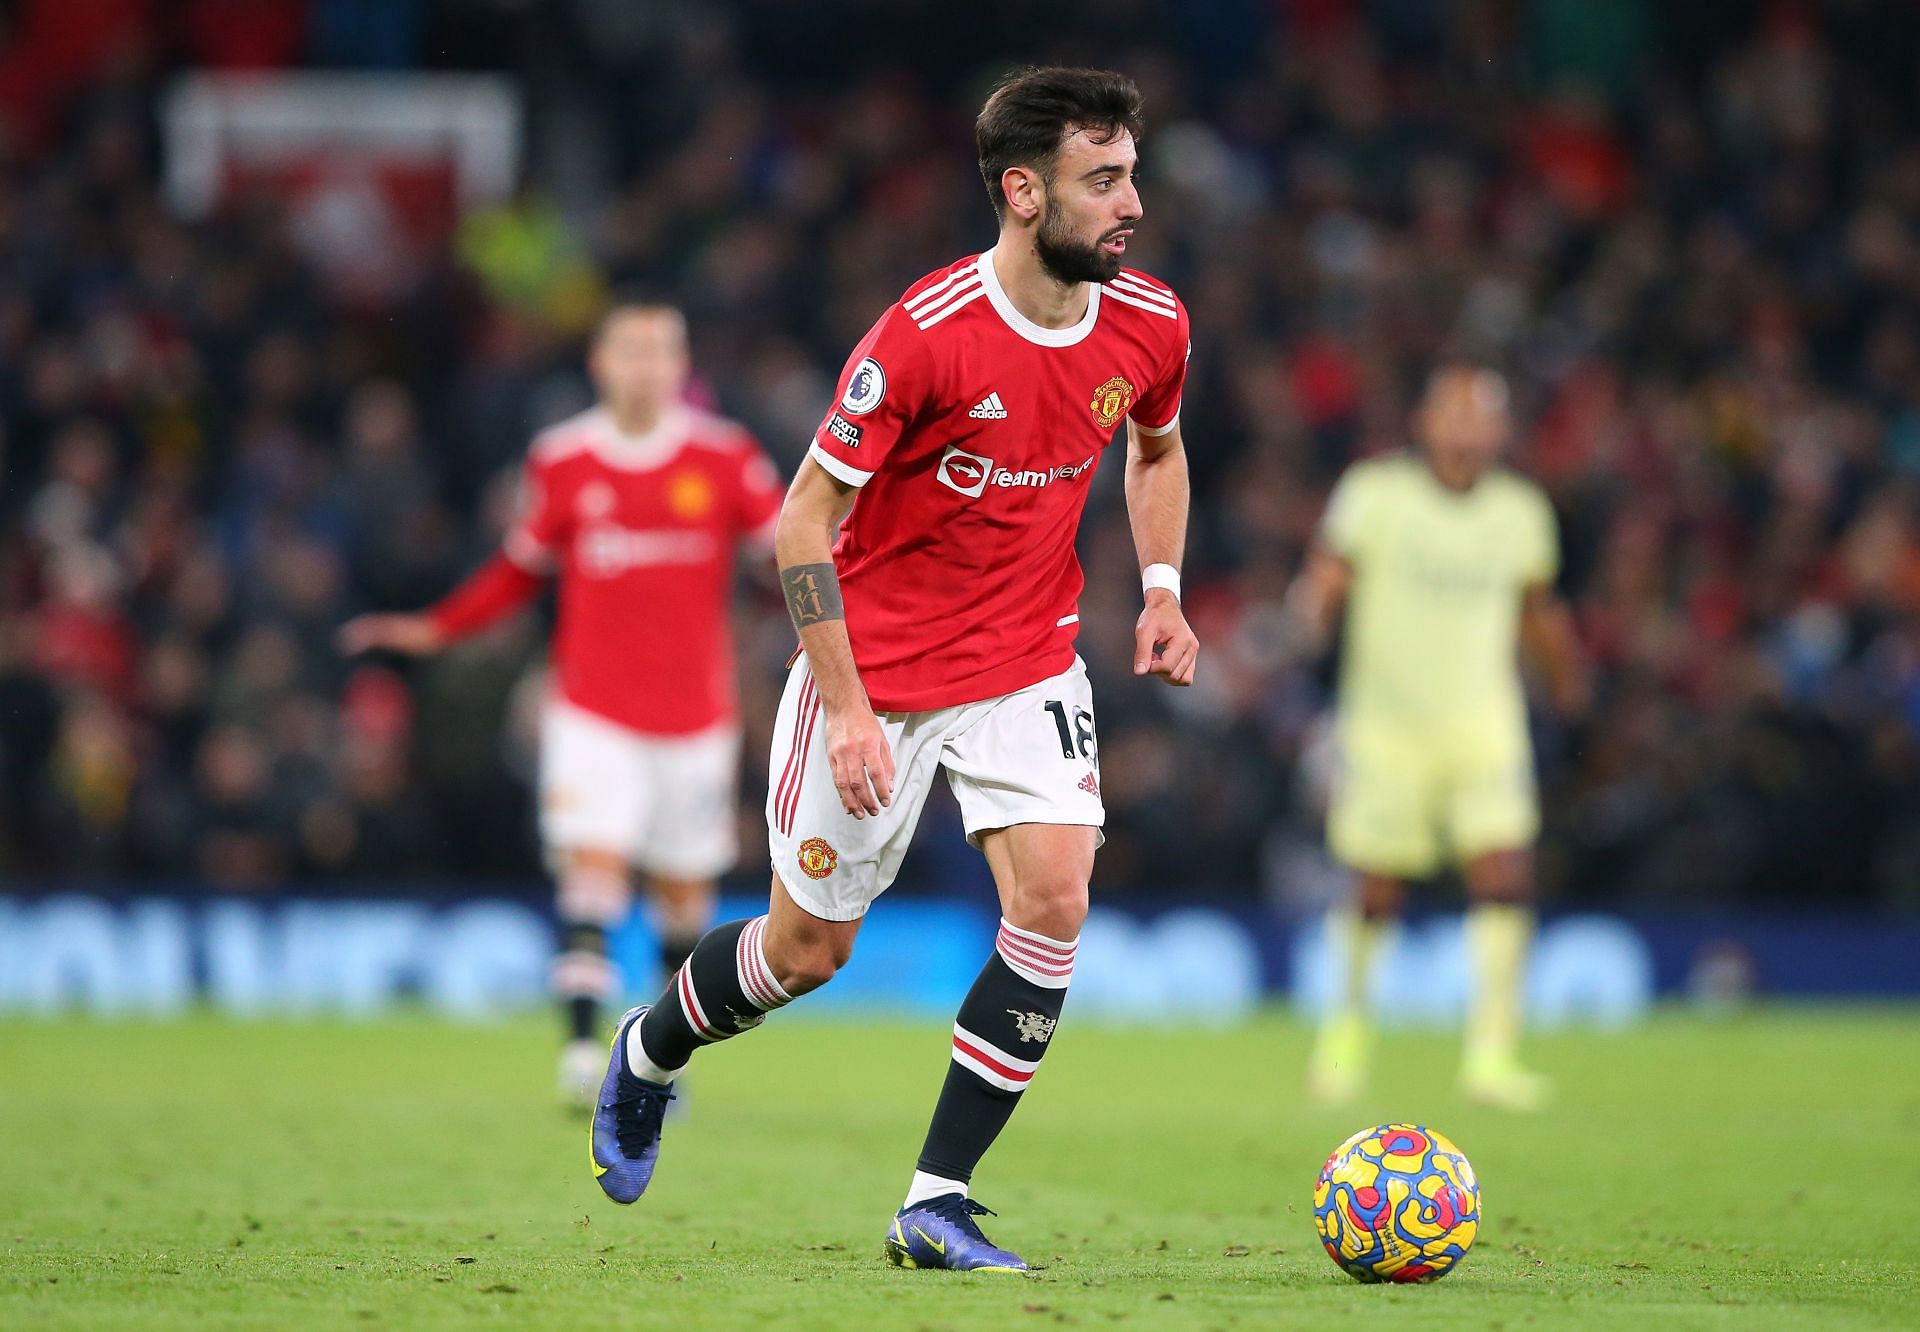 Bruno Fernandes has been fantastic for Manchester United and should be rewarded with a spot in the FIFPro World XI.